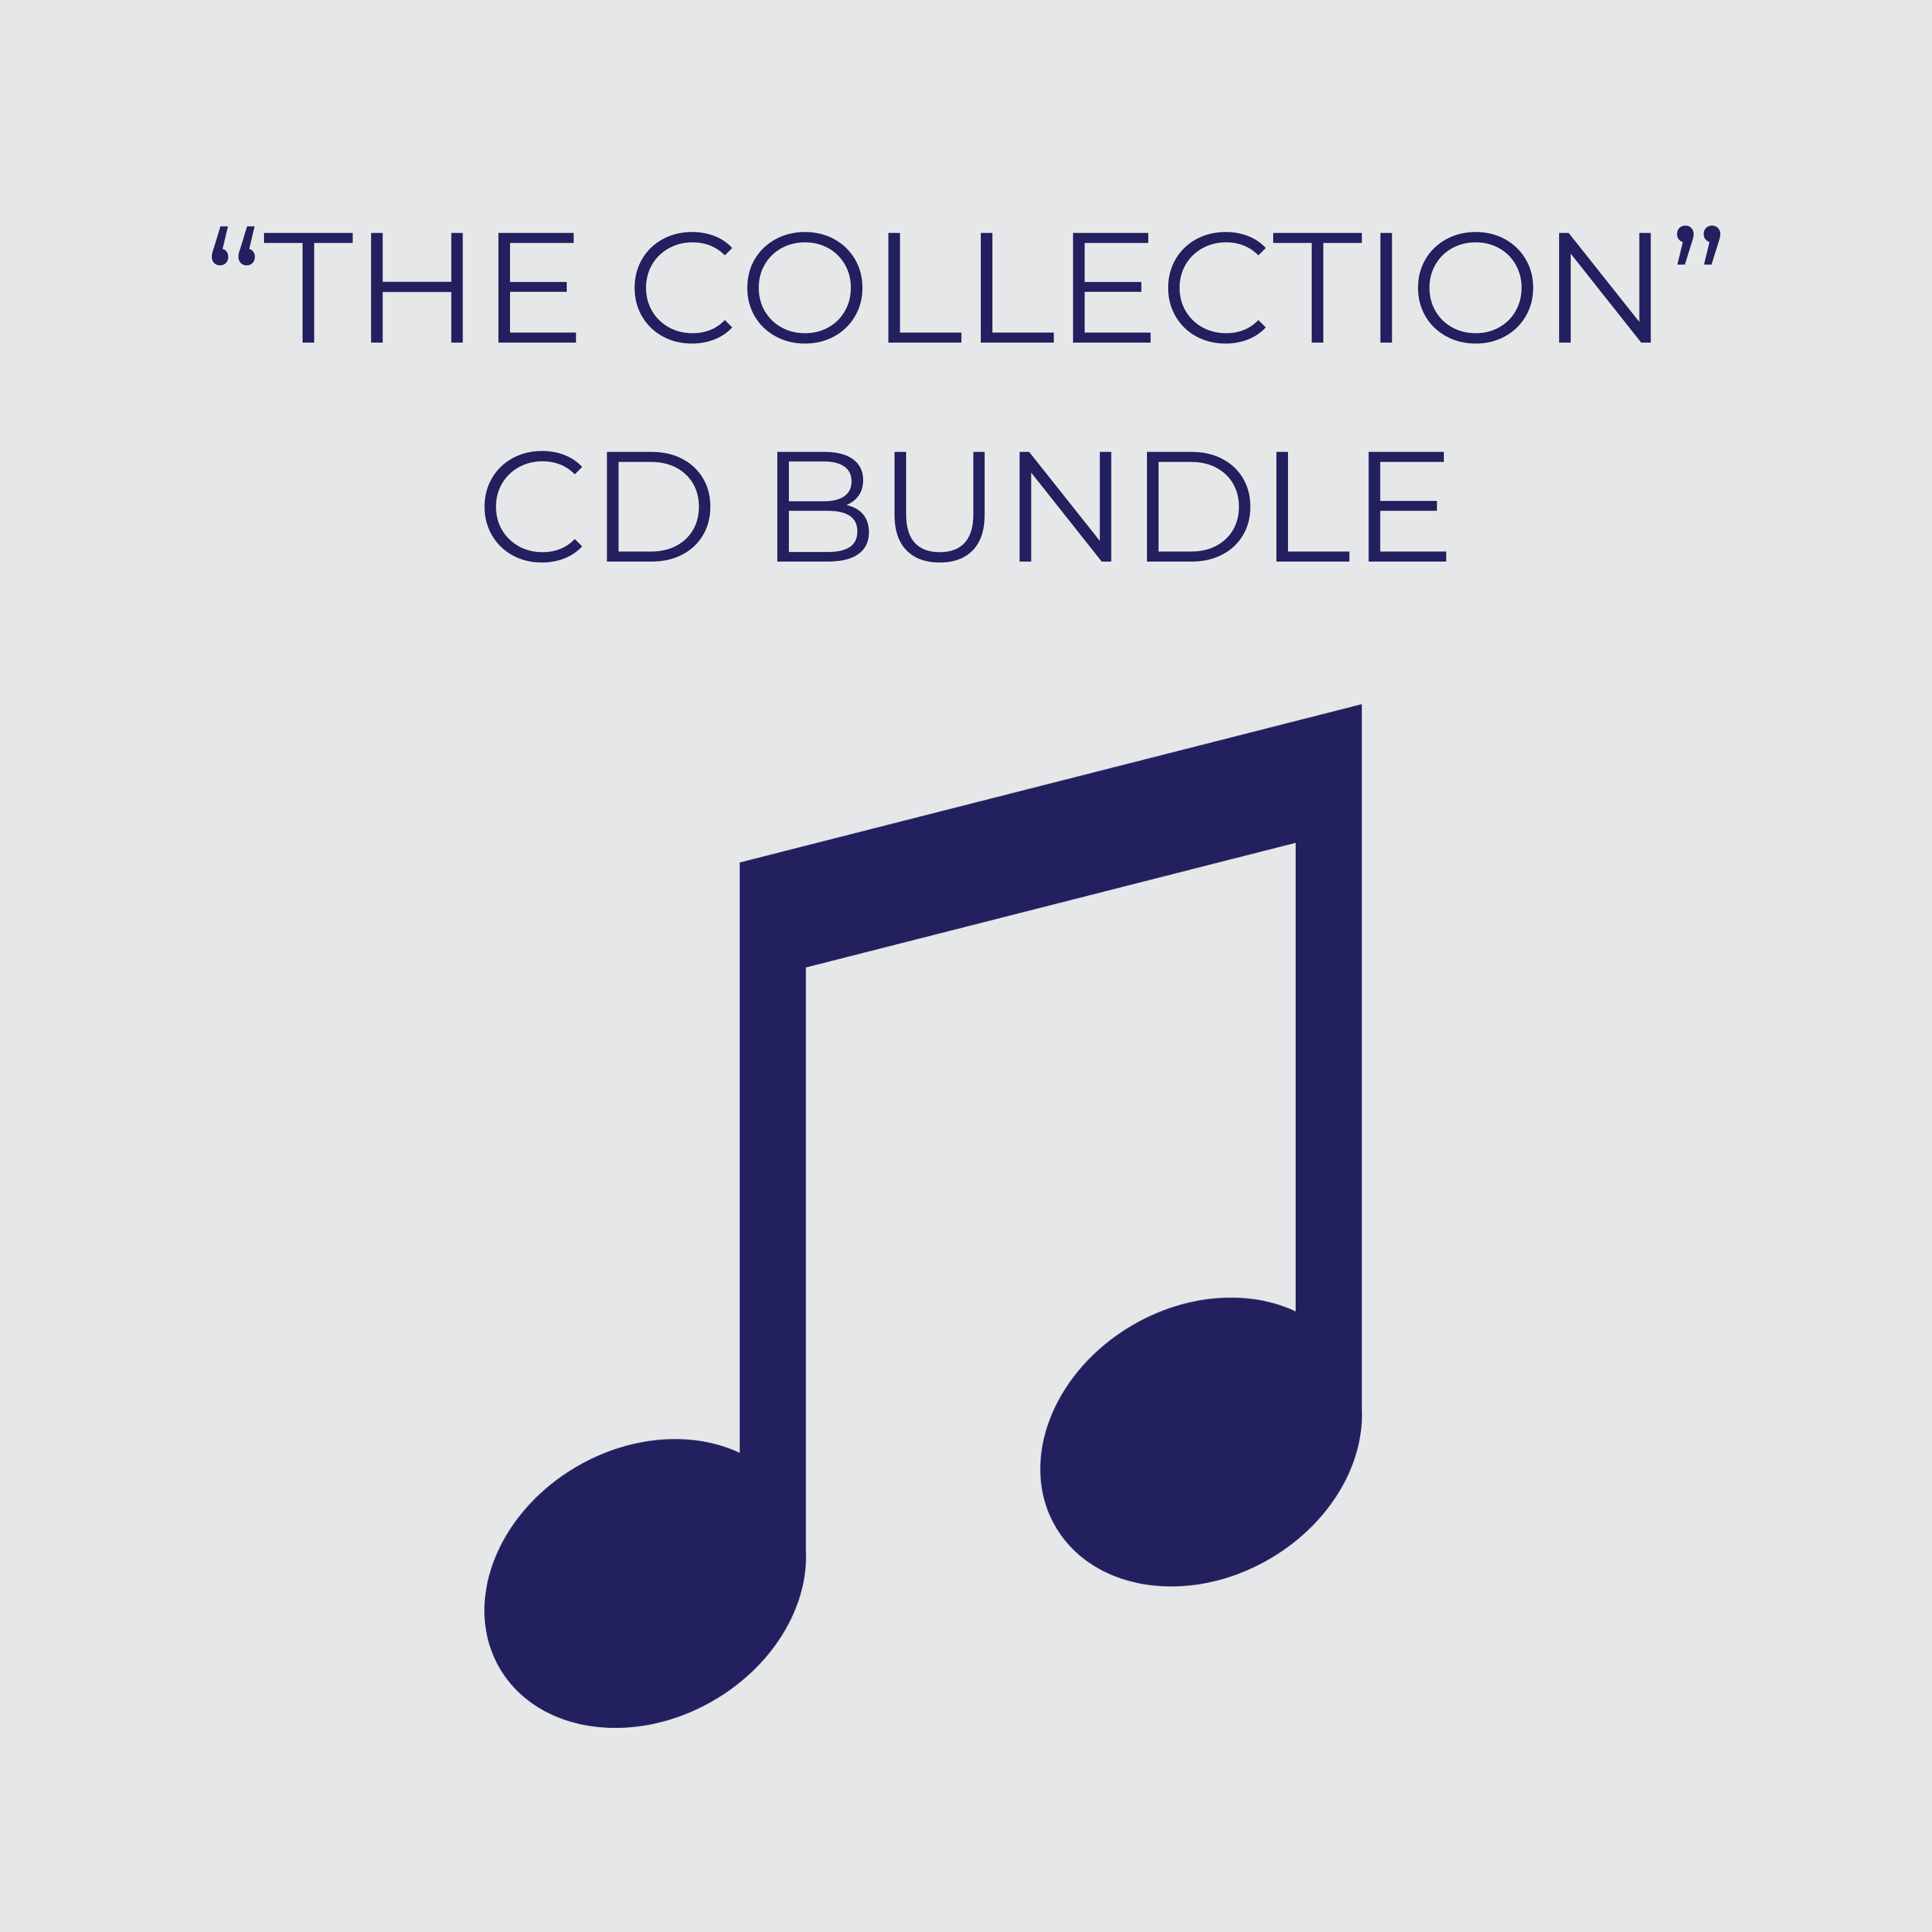 "The Collection" CD Bundle